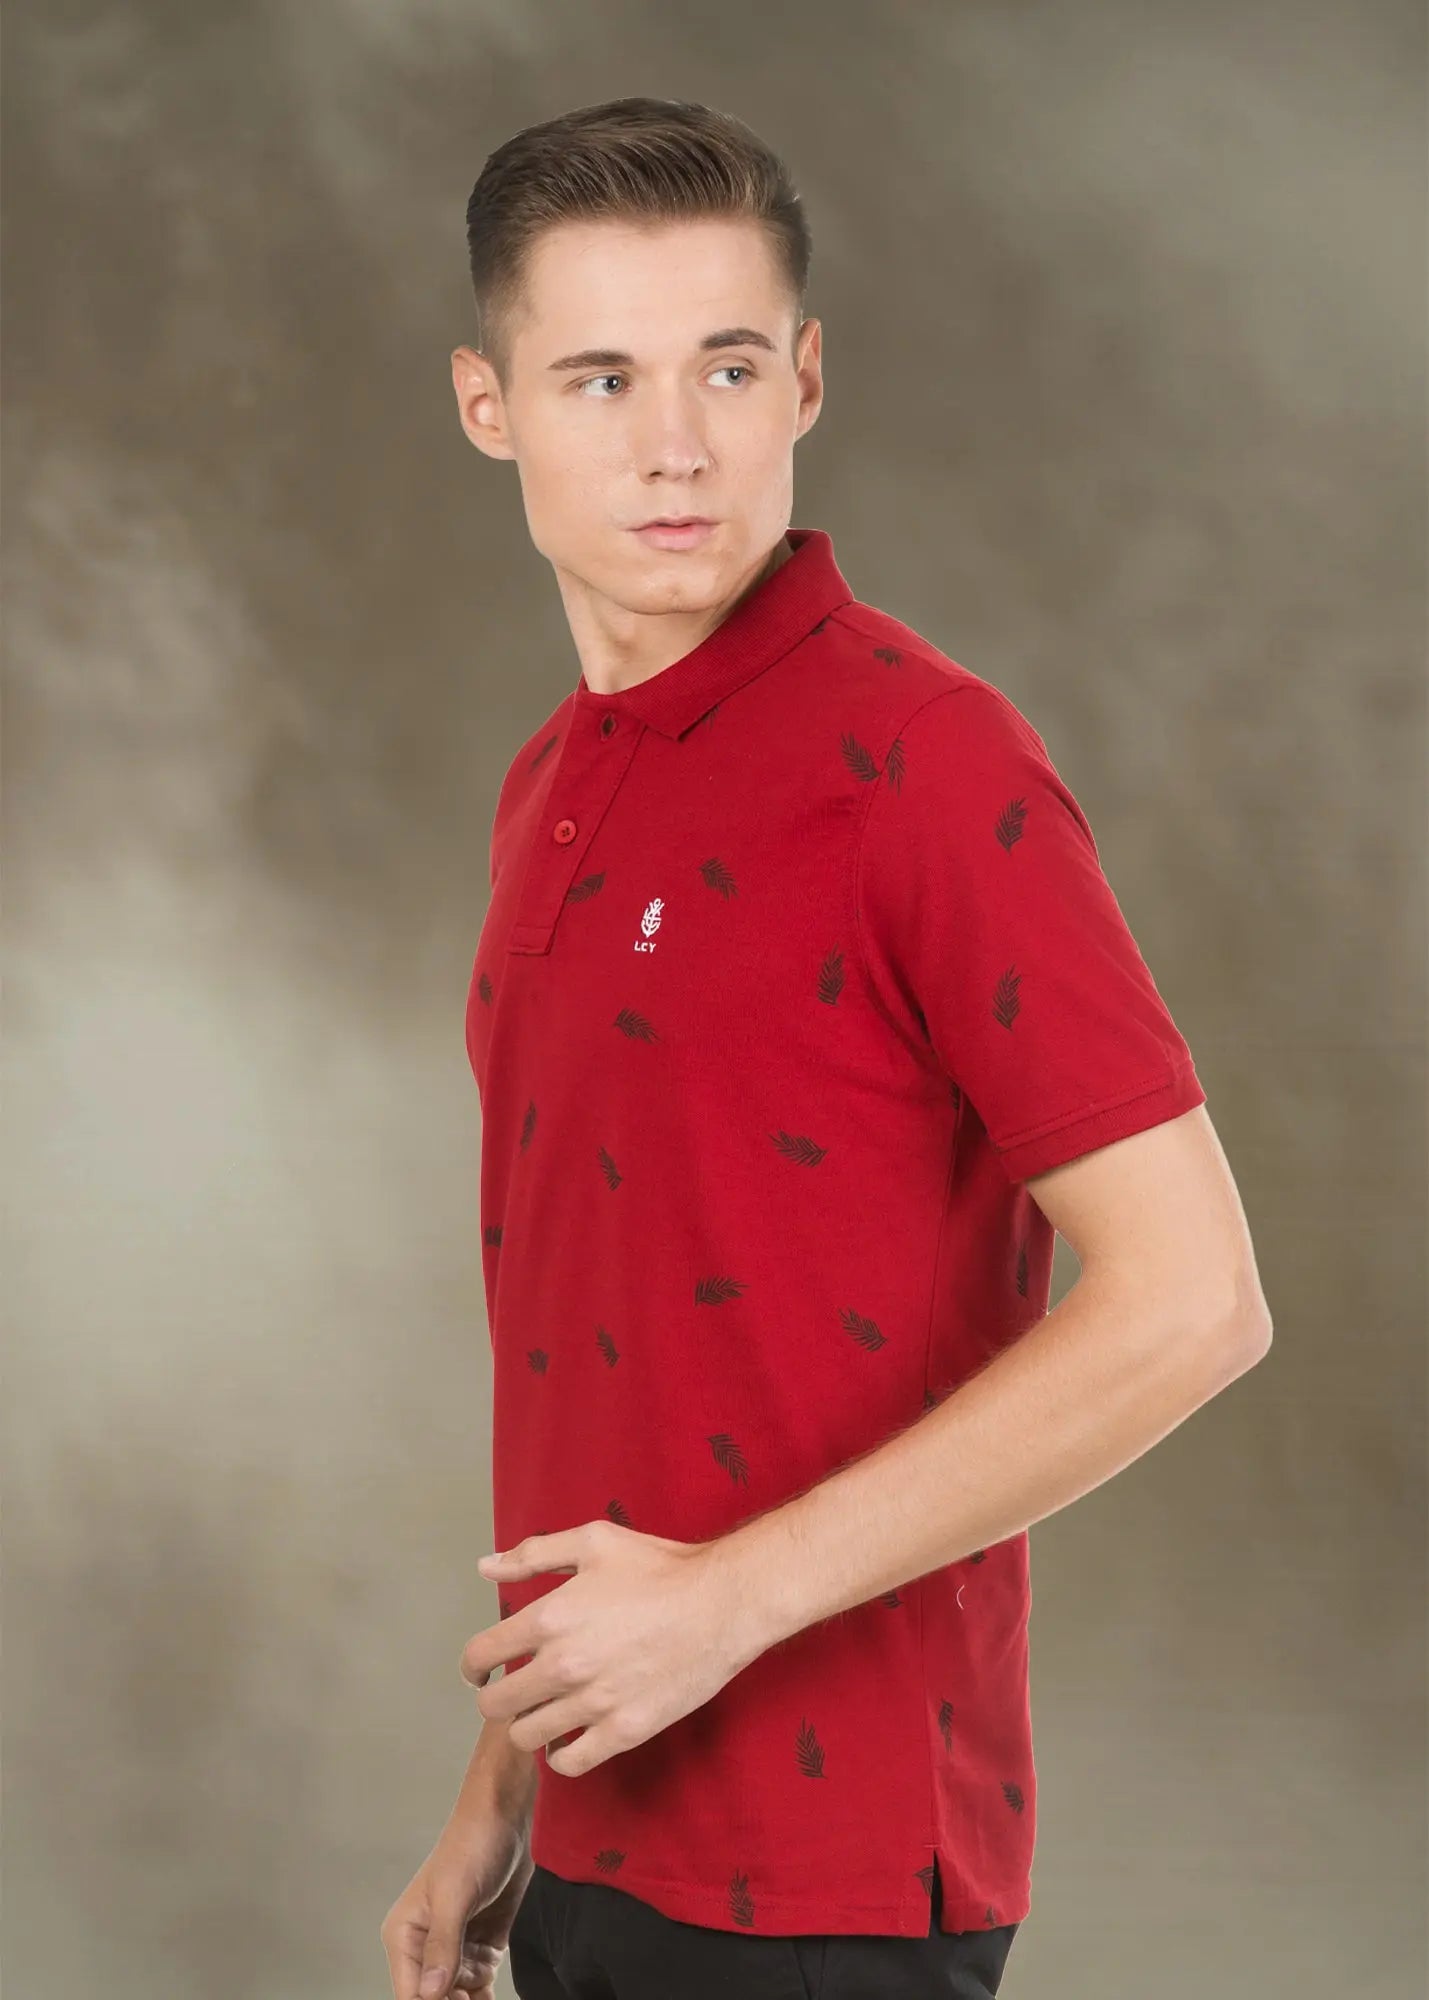 LCY LONDON | Art of Summer - Tropical Inspired Printed Men&#39;s Short Sleeved Polo Shirt LCY London